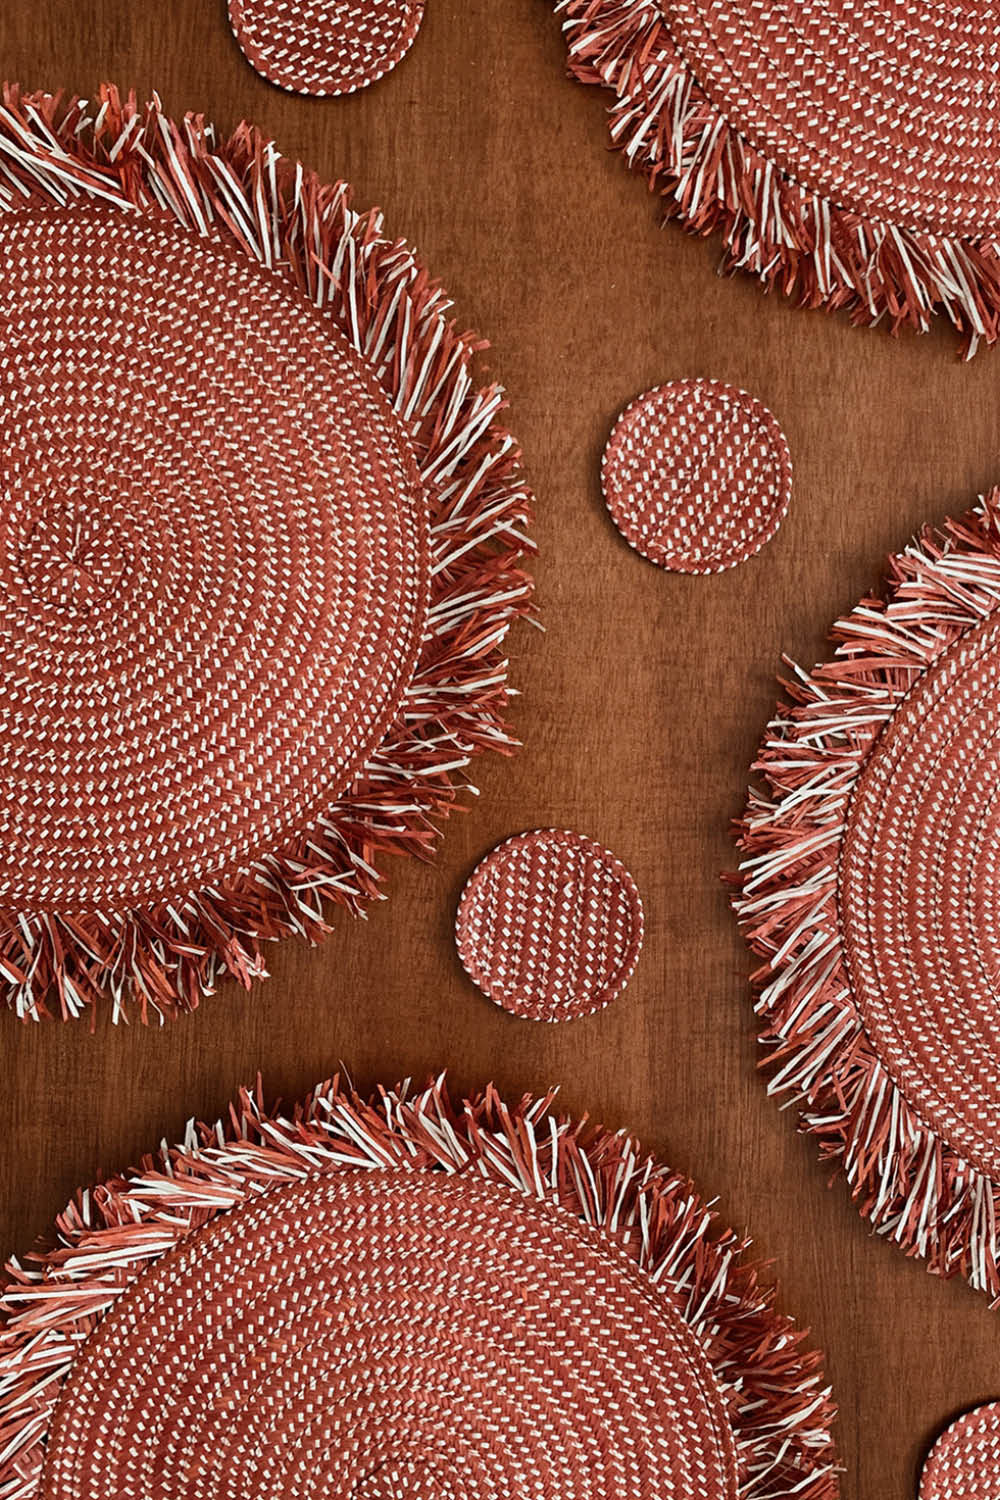 Zenu Place Mat and Coaster Set of 4 in Red/Natural